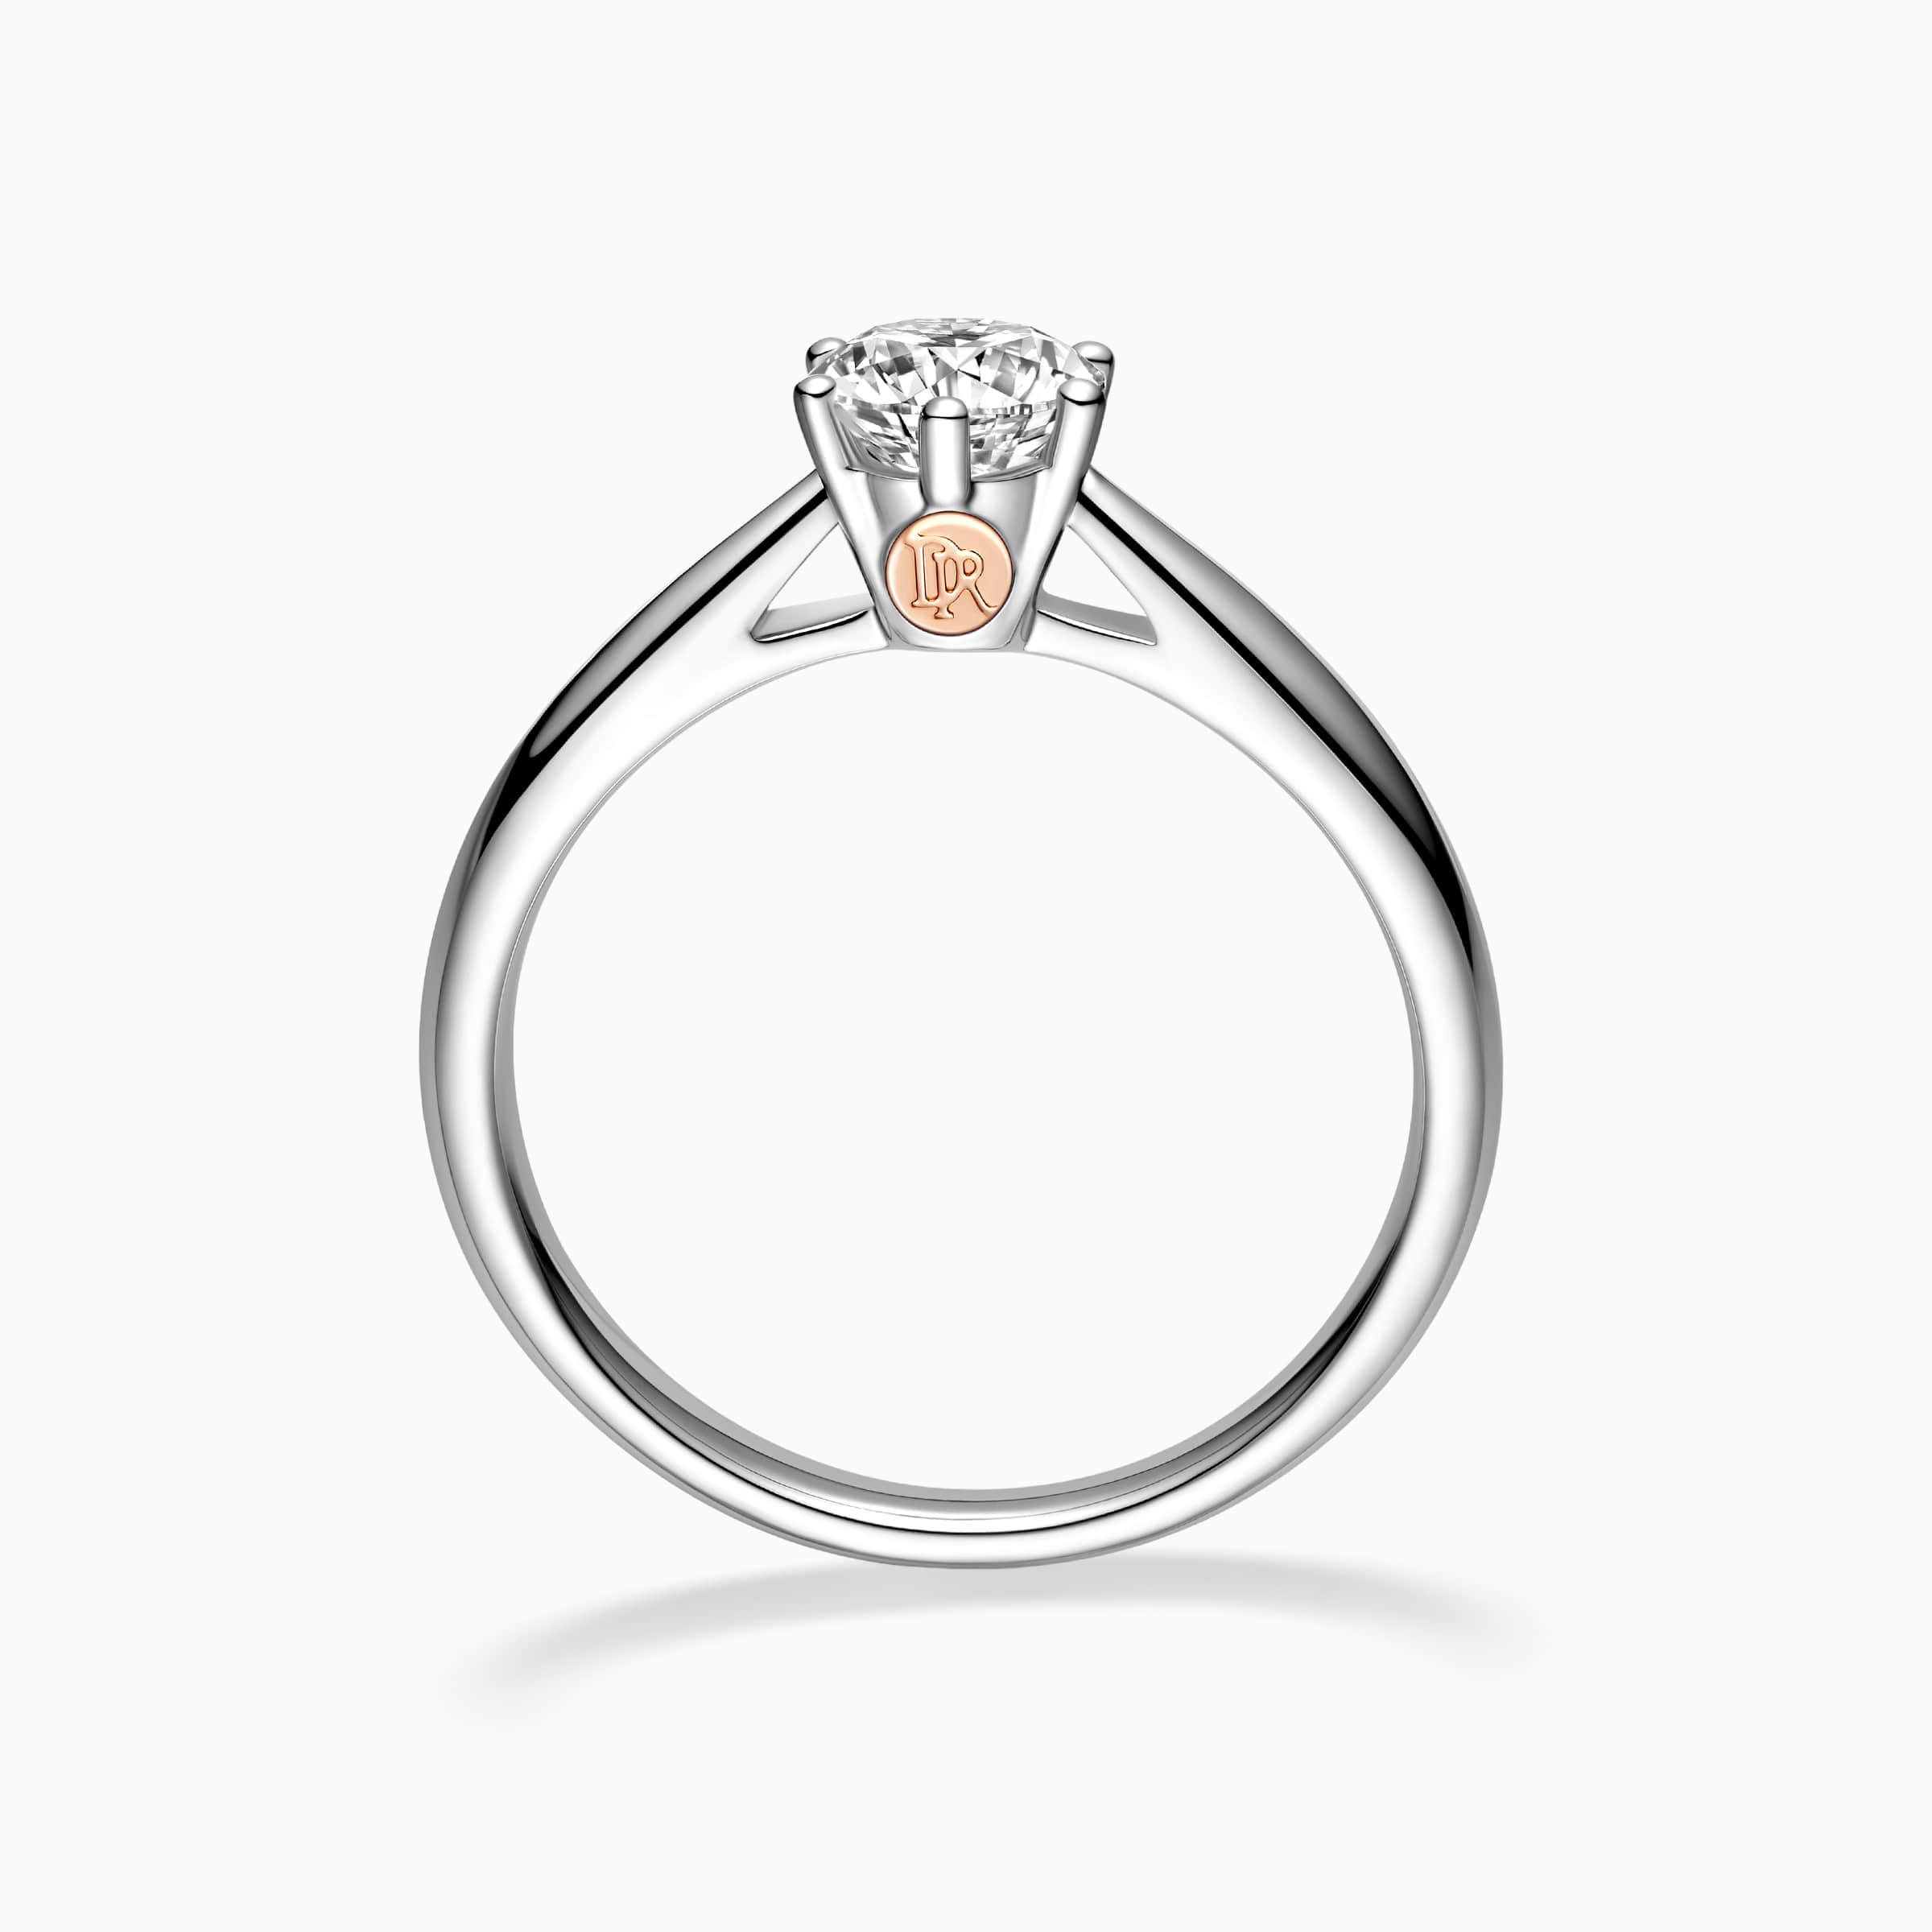 DR Love Mark 6 prong engagement ring